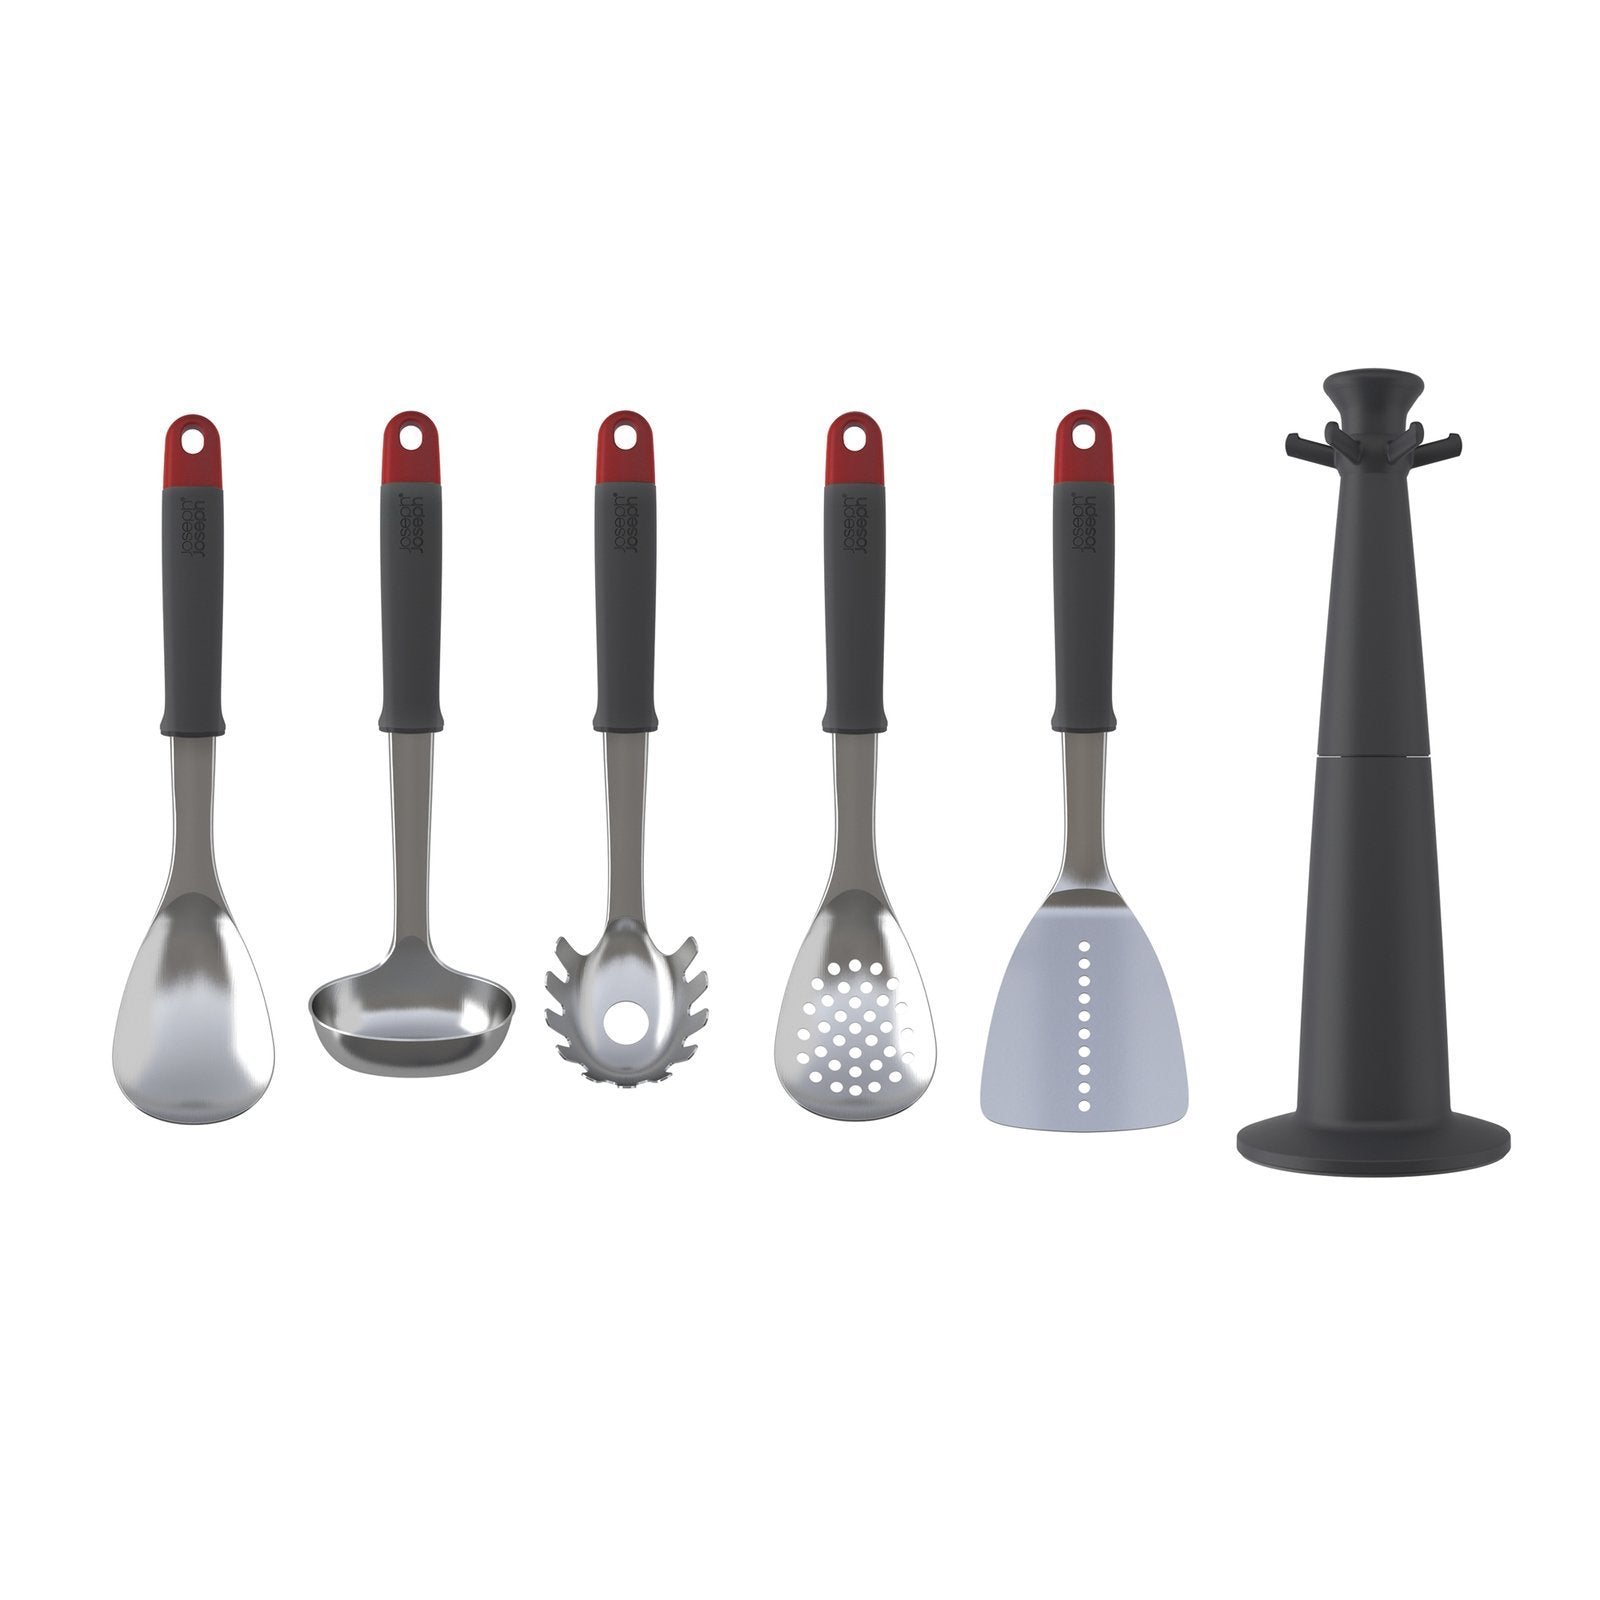 Top rated joseph joseph 10469 elevate carousel stainless steel kitchen utensil set with rotating storage stand 5 piece red